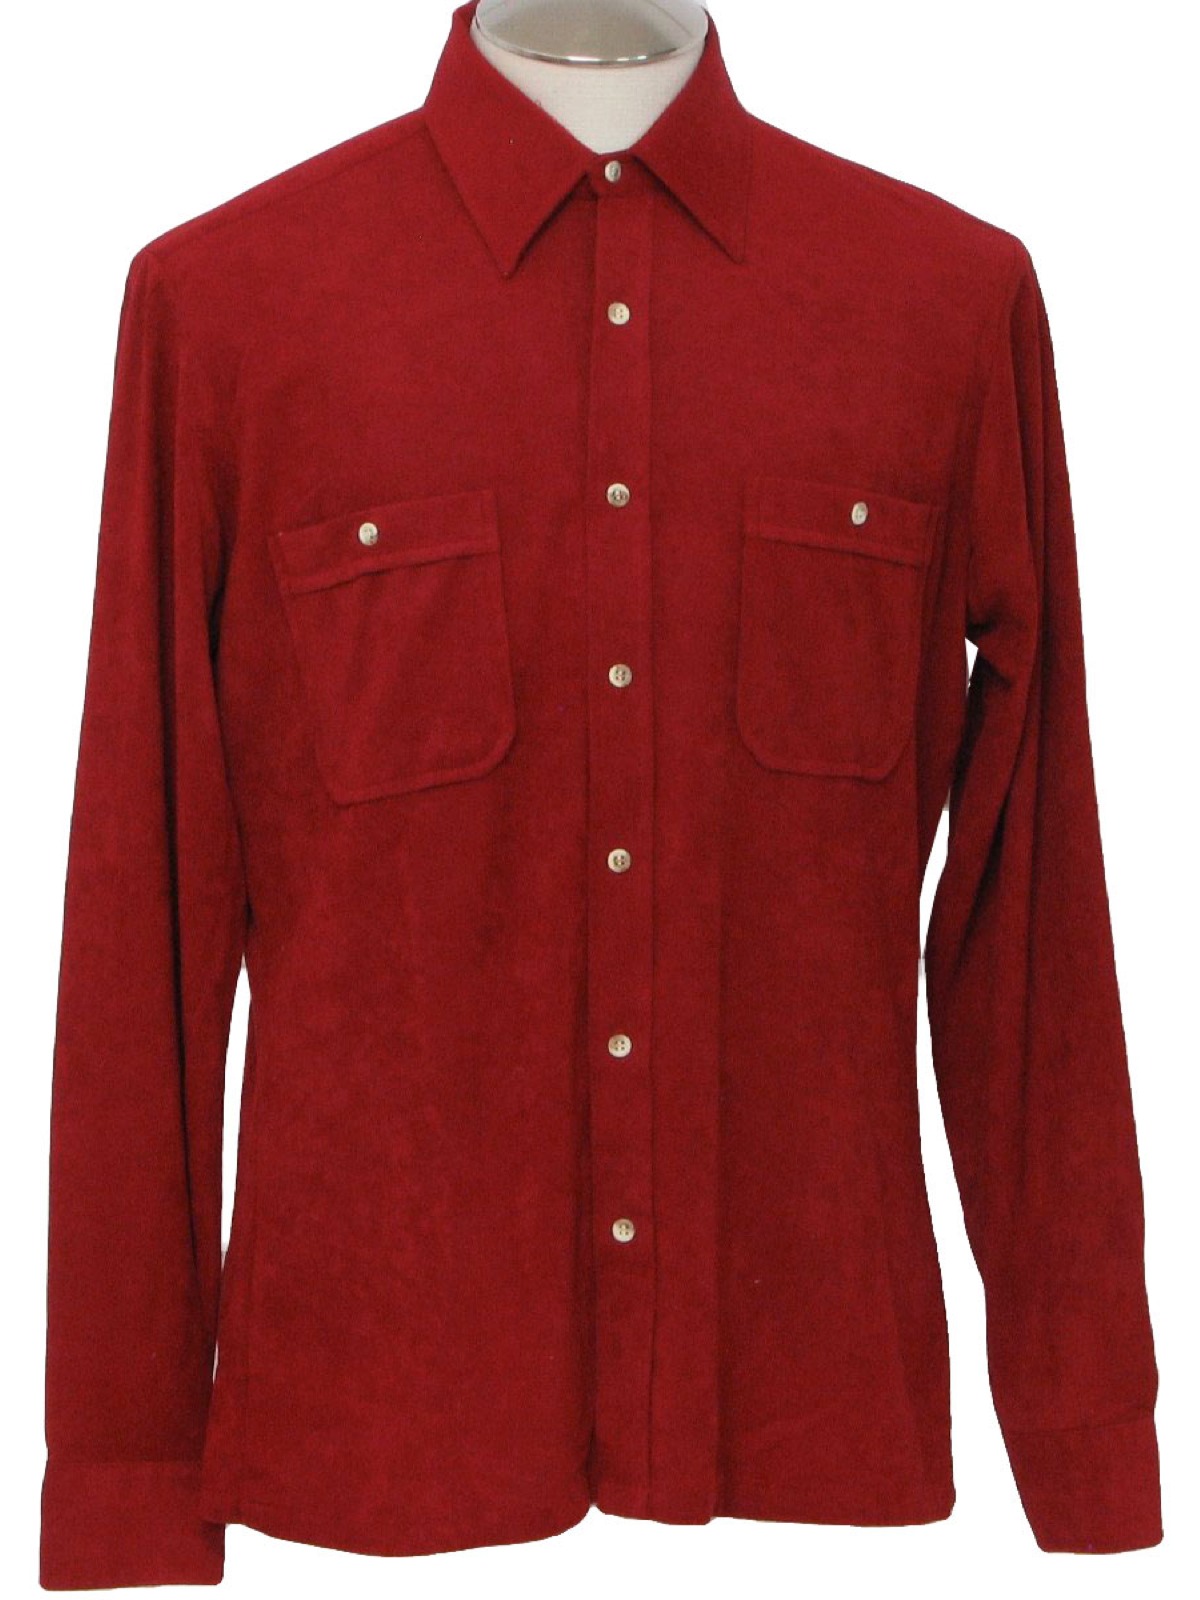 red button up shirt mens vintage